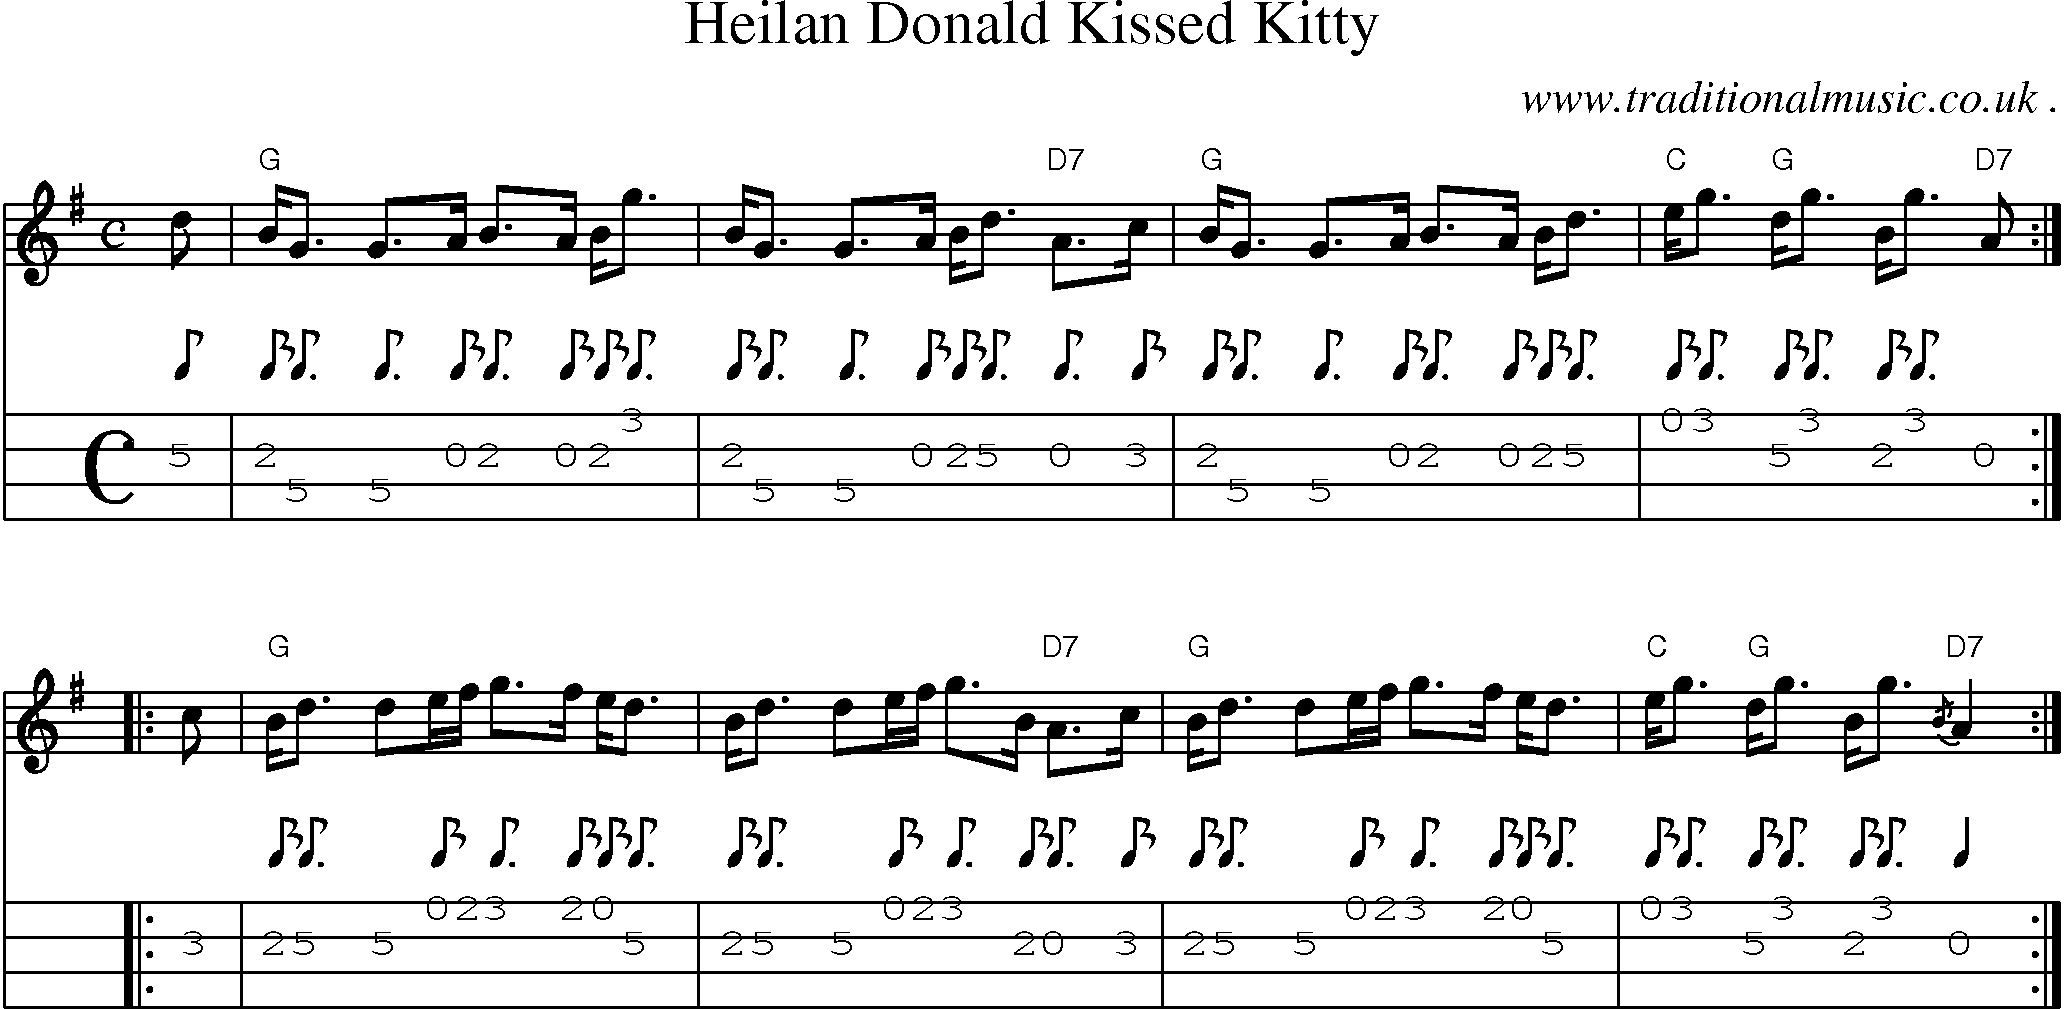 Sheet-music  score, Chords and Mandolin Tabs for Heilan Donald Kissed Kitty